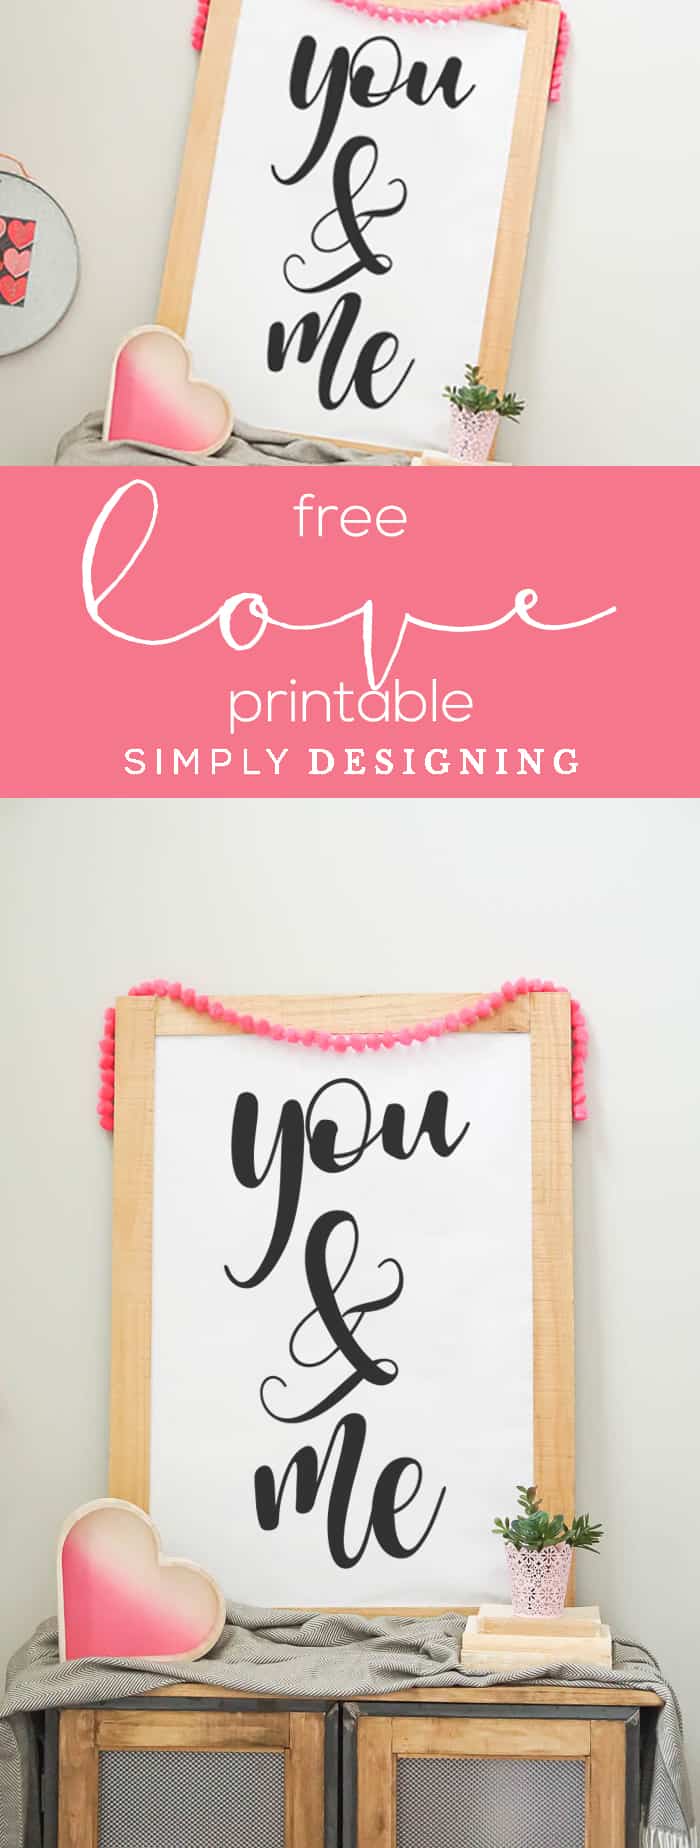 Free Valentines Day Print - Free Master Bedroom Print - Free Love Print - You and Me Printable - Simply Designing